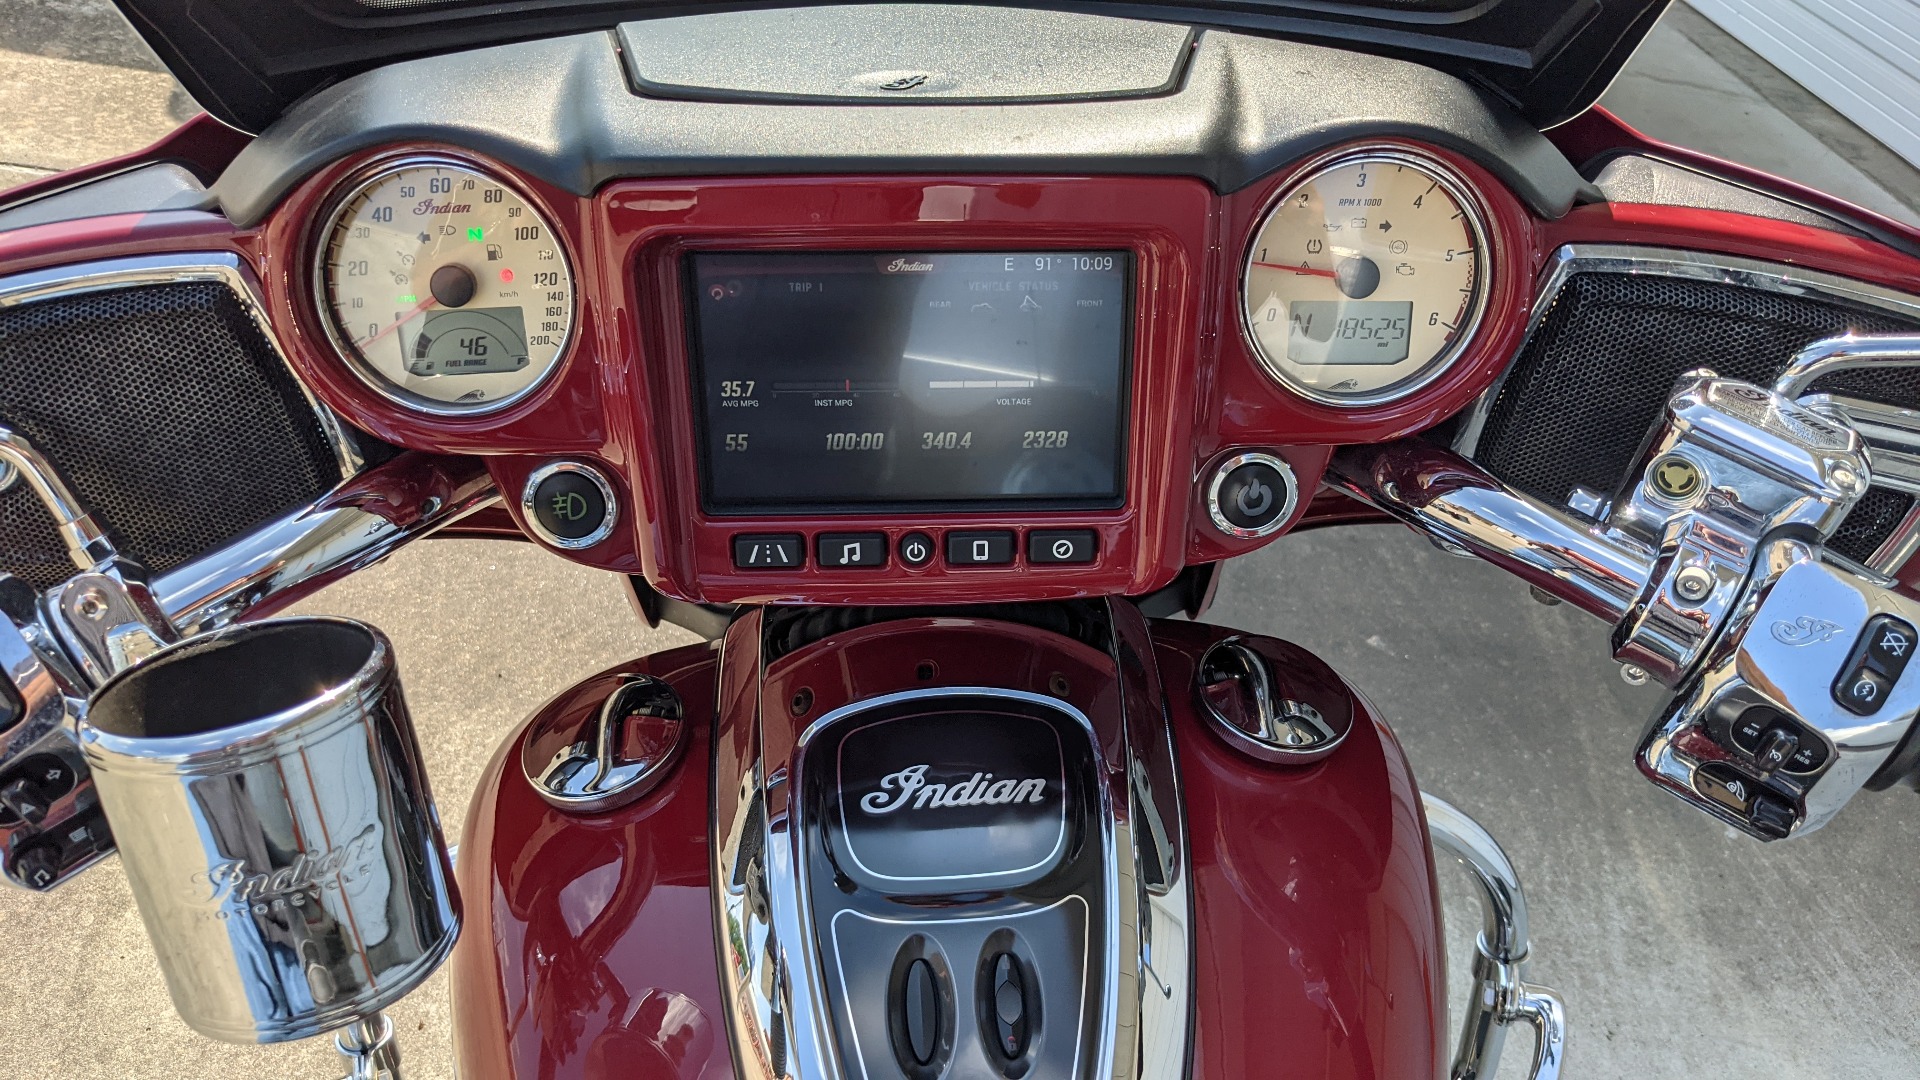 2018 Indian Chieftain Classic for sale near me - Photo 11